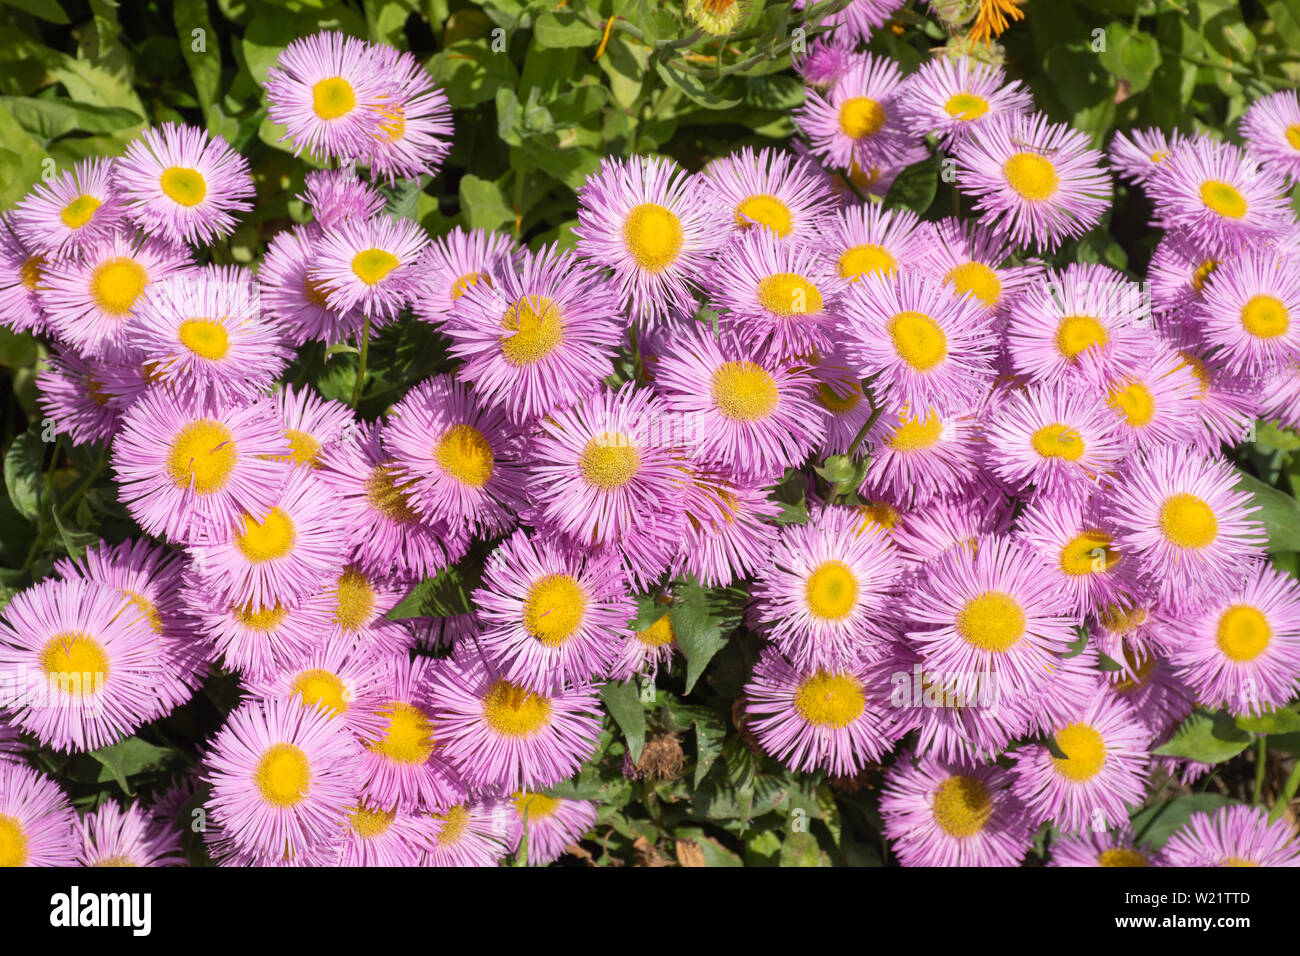 Aster alpinus, pink and yellow flowers in the daisy family (Asteraceae) in an English garden in early July, UK Stock Photo